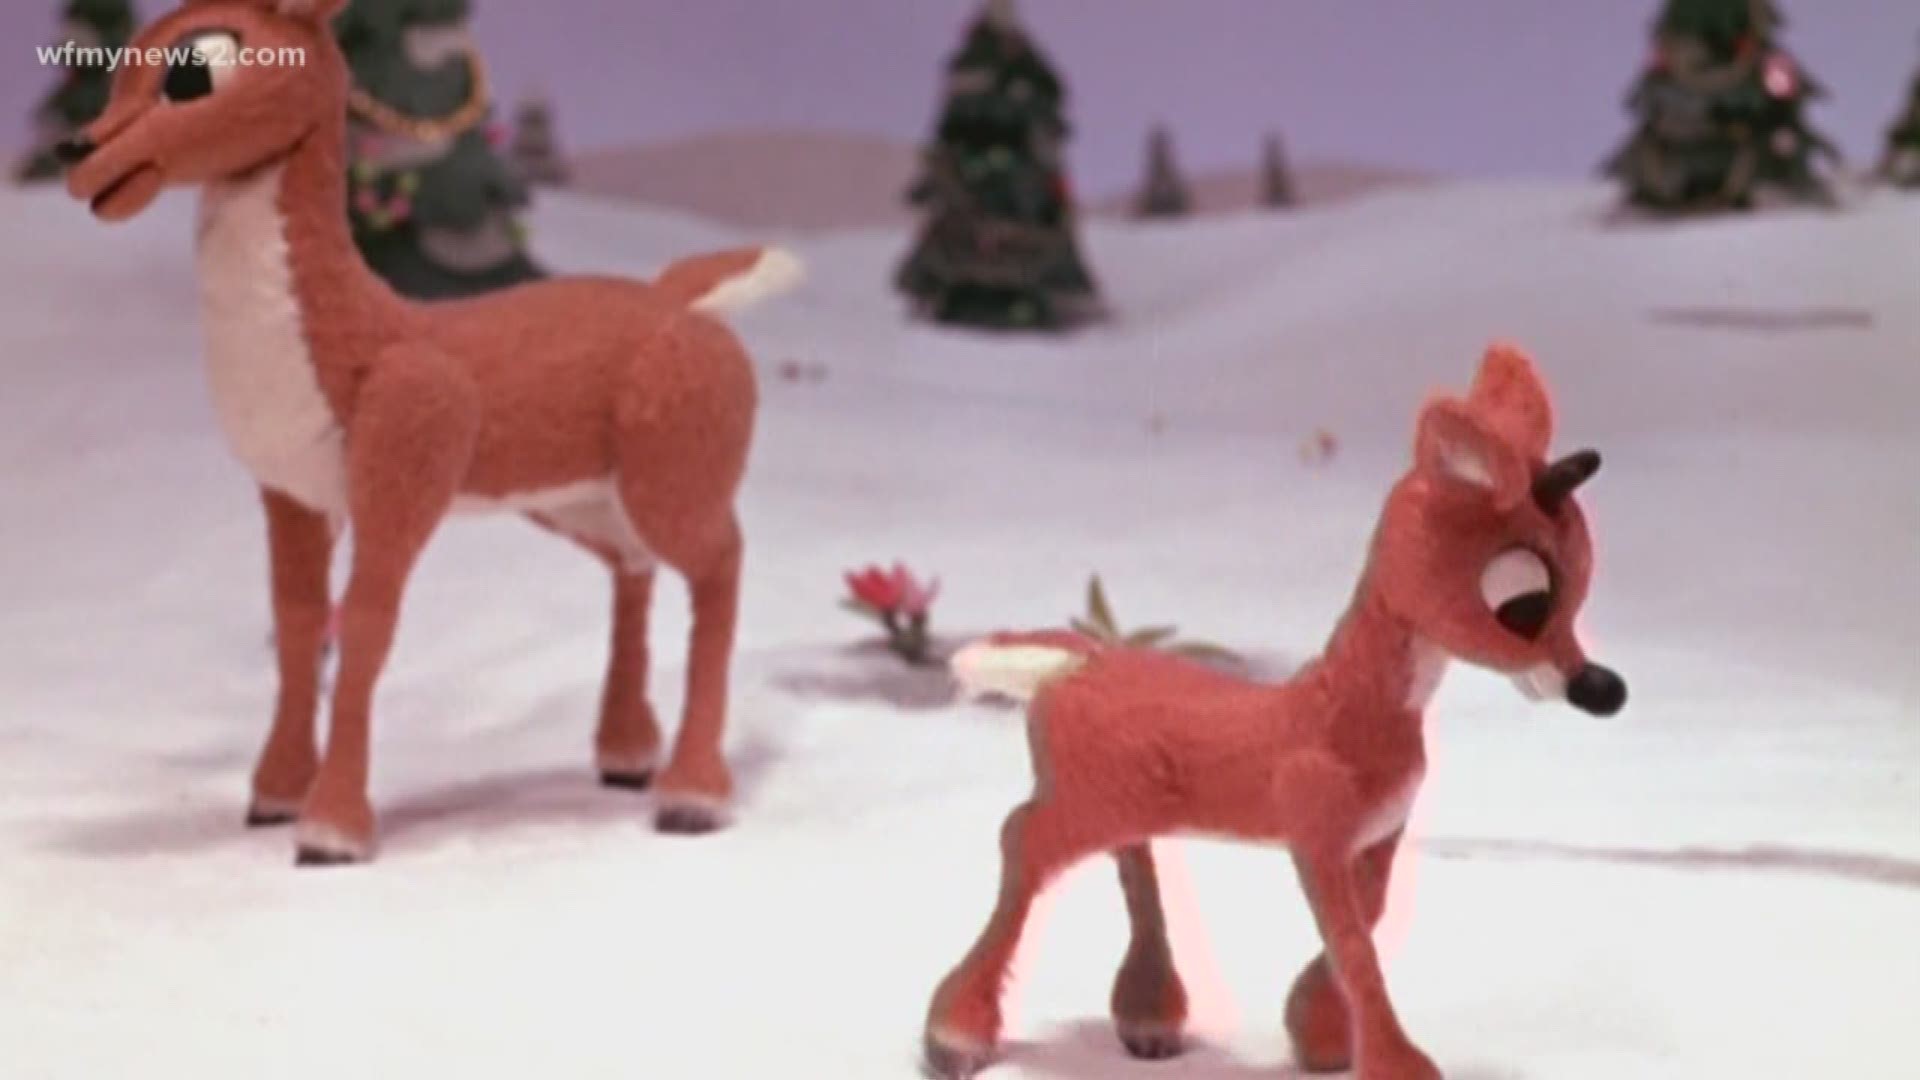 Some people are saying "Rudolph The Red-Nosed Reindeer" should be banned because it promotes bullying.